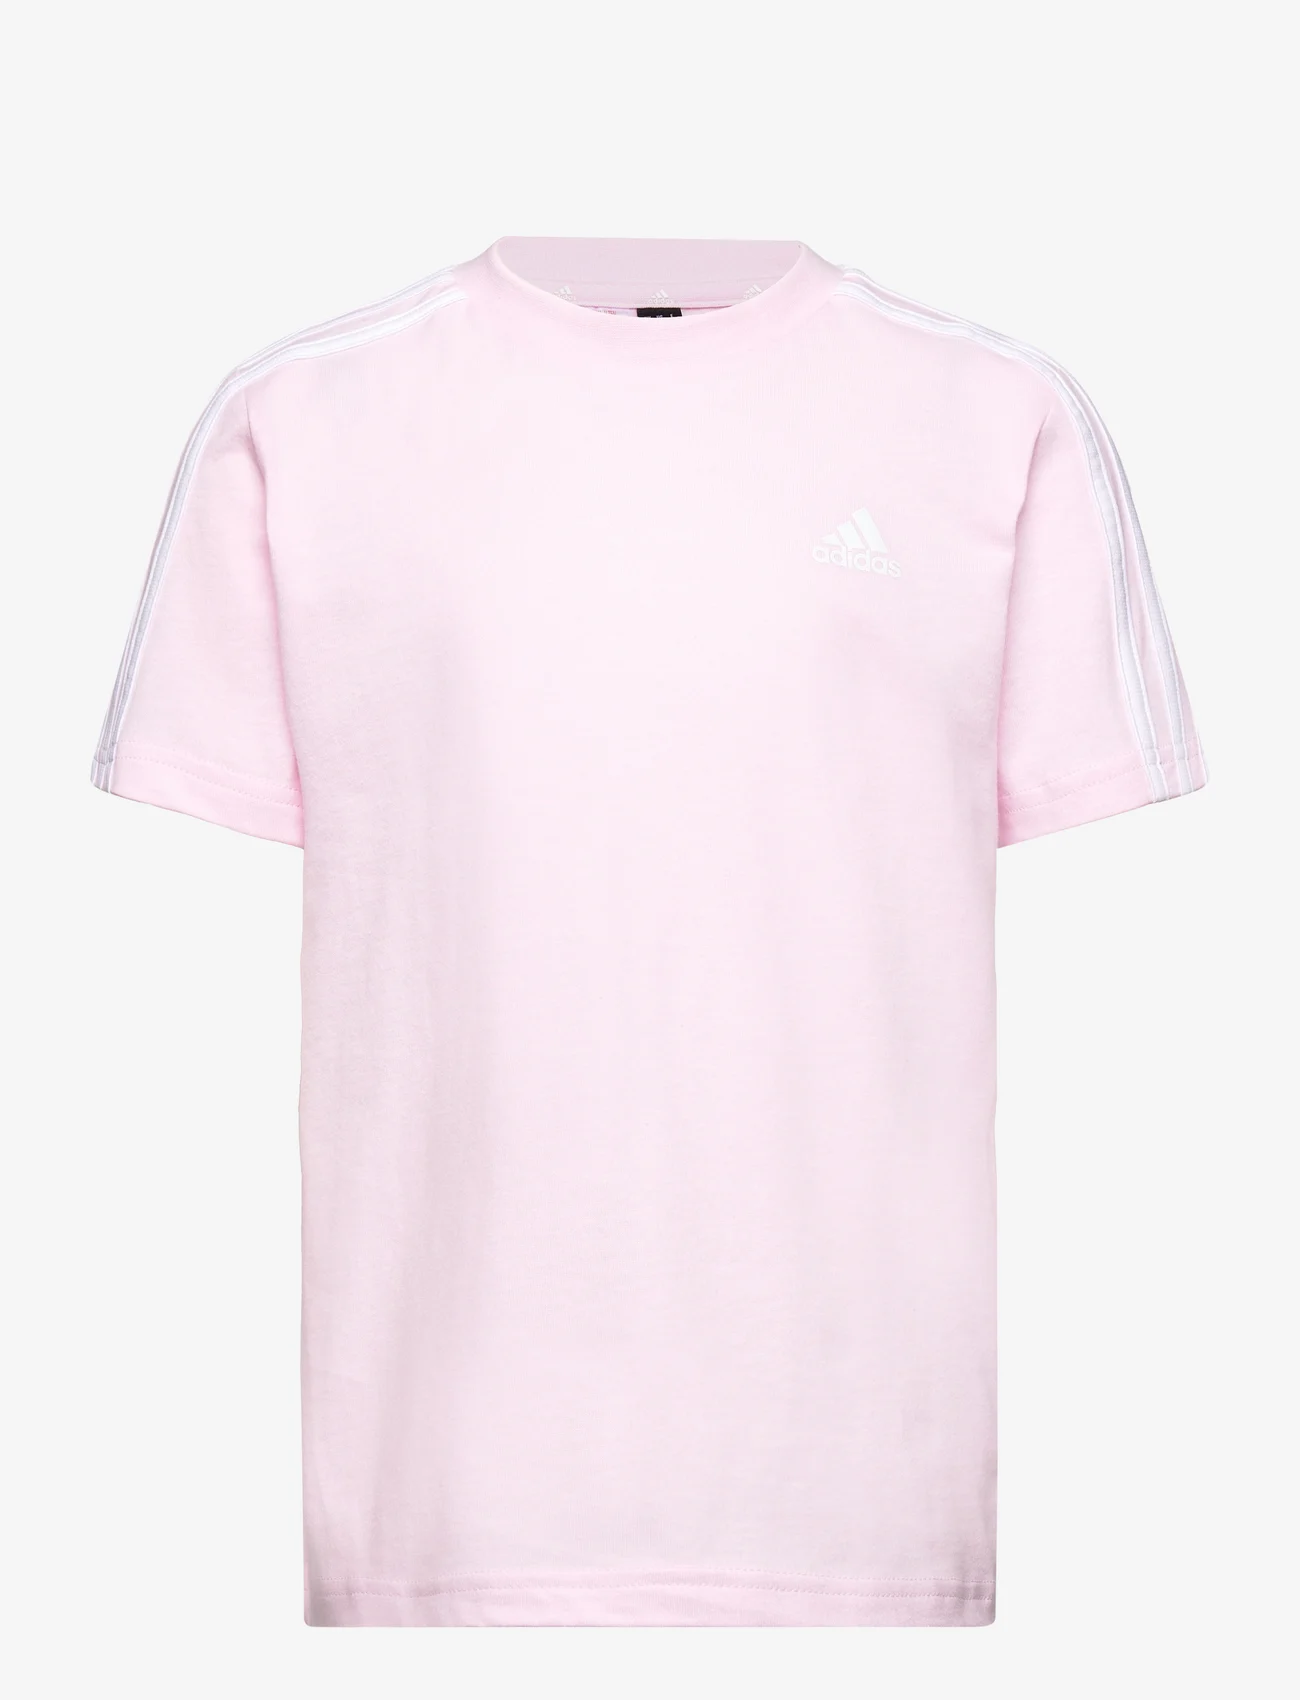 adidas Performance - LK 3S CO TEE - short-sleeved t-shirts - clpink/white - 0